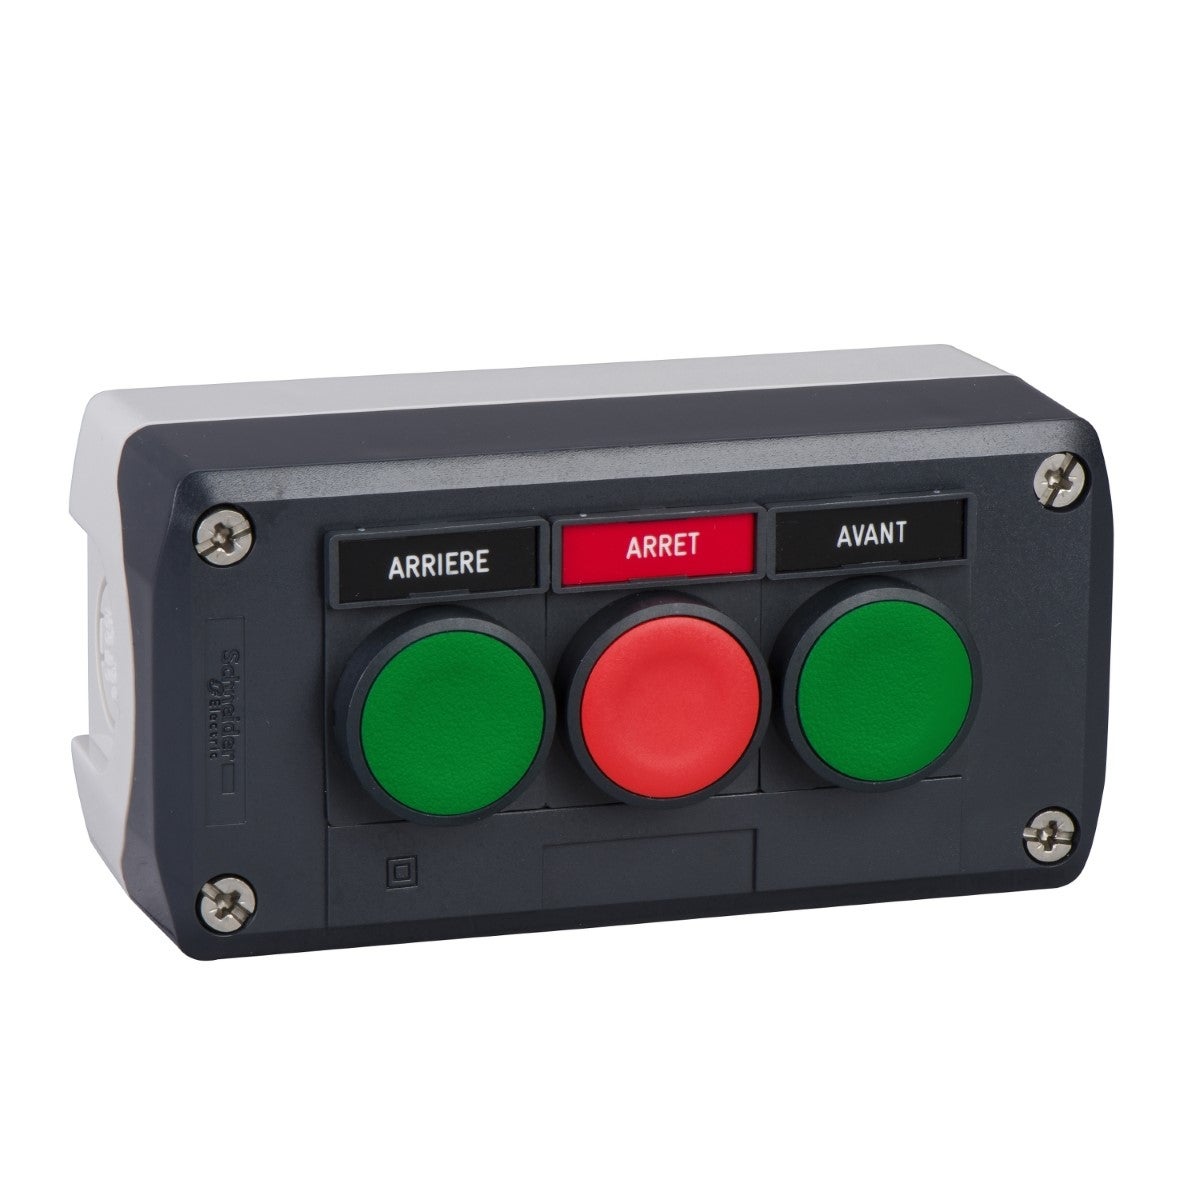 complete control station, Harmony XALD, dark grey, 2 green and 1 red flush pushbuttons 22 mm